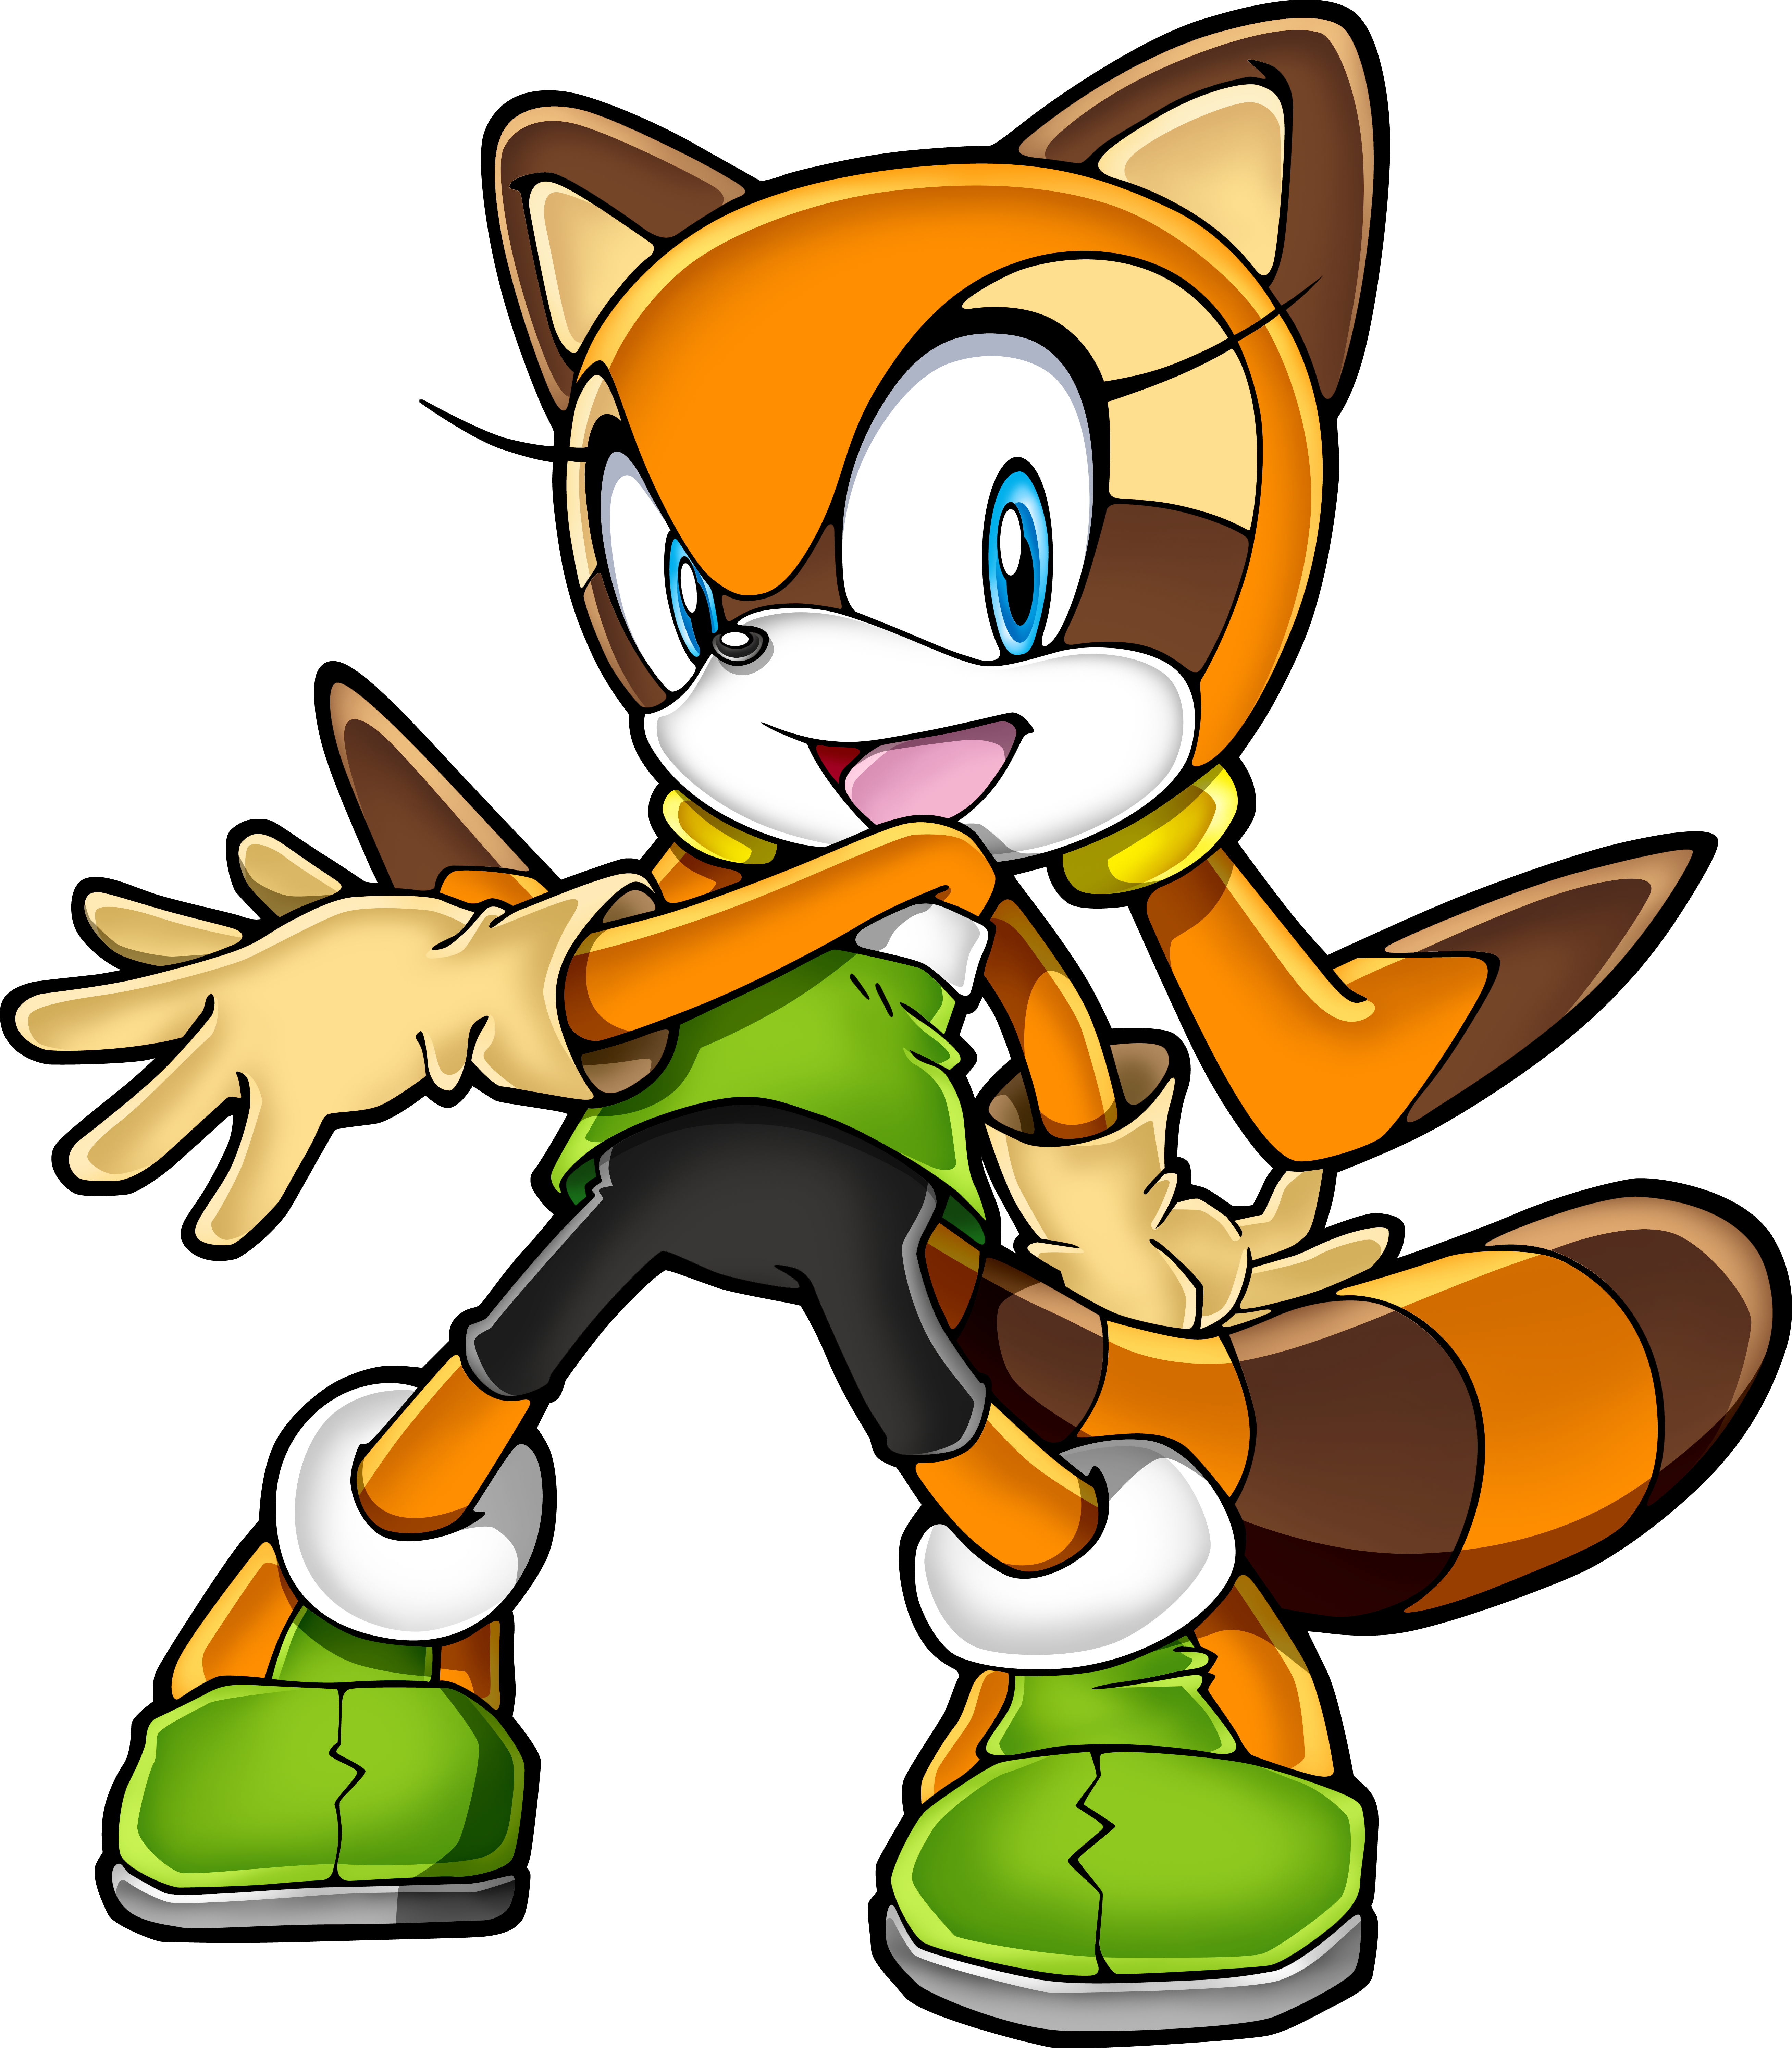 Jamey the Hedgehog (Male Amy Rose), MeLoDyClerenes Wiki